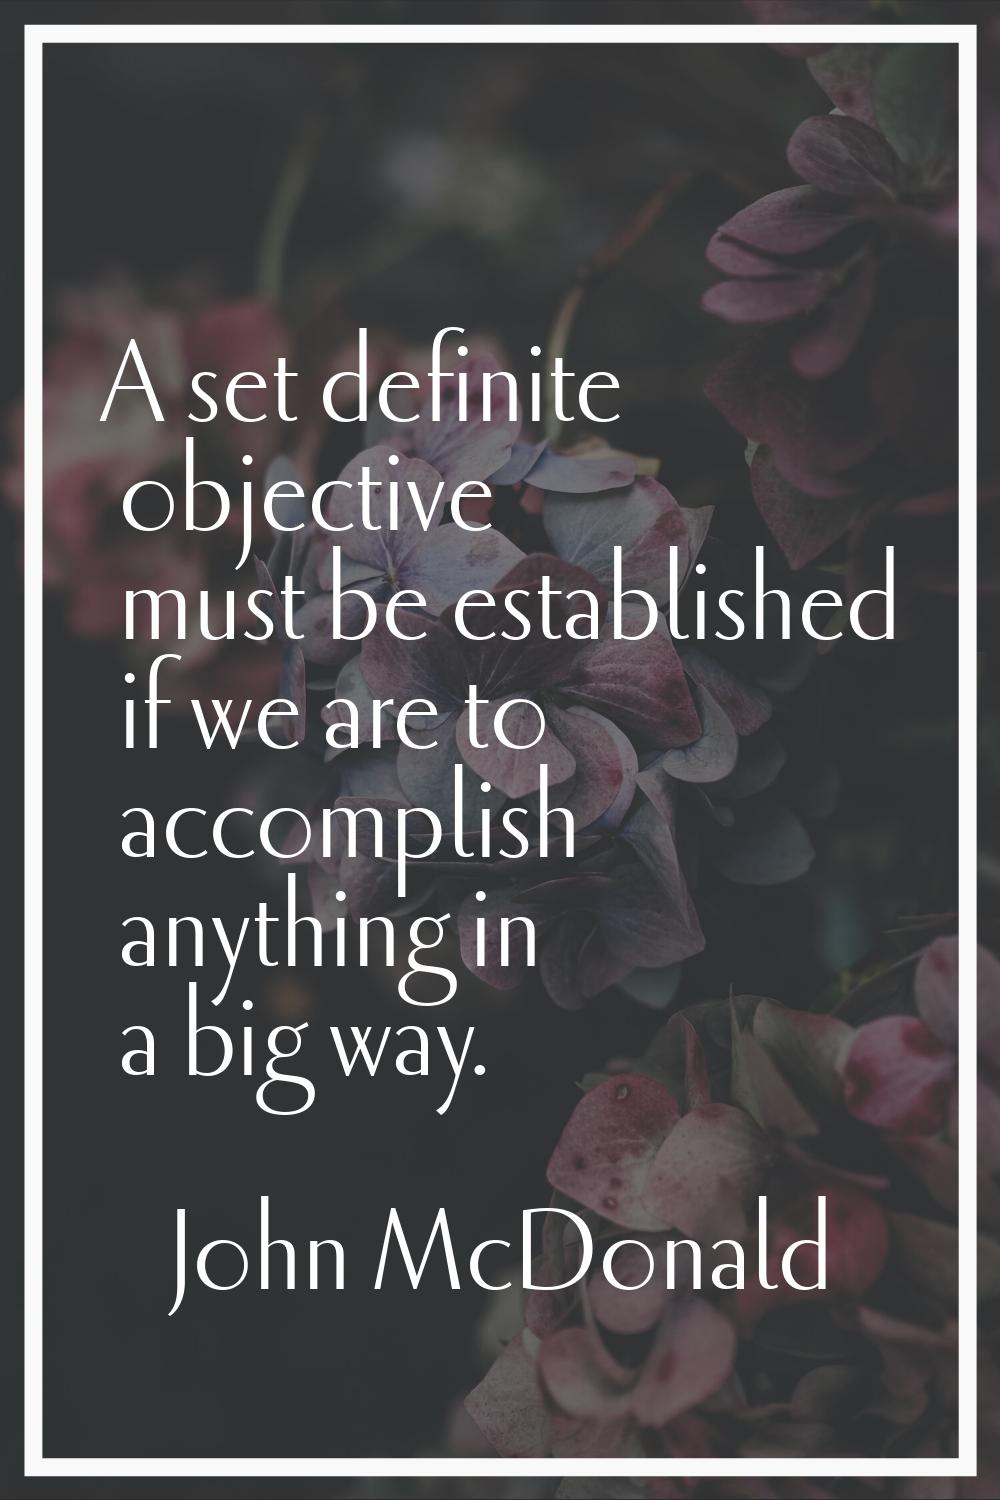 A set definite objective must be established if we are to accomplish anything in a big way.